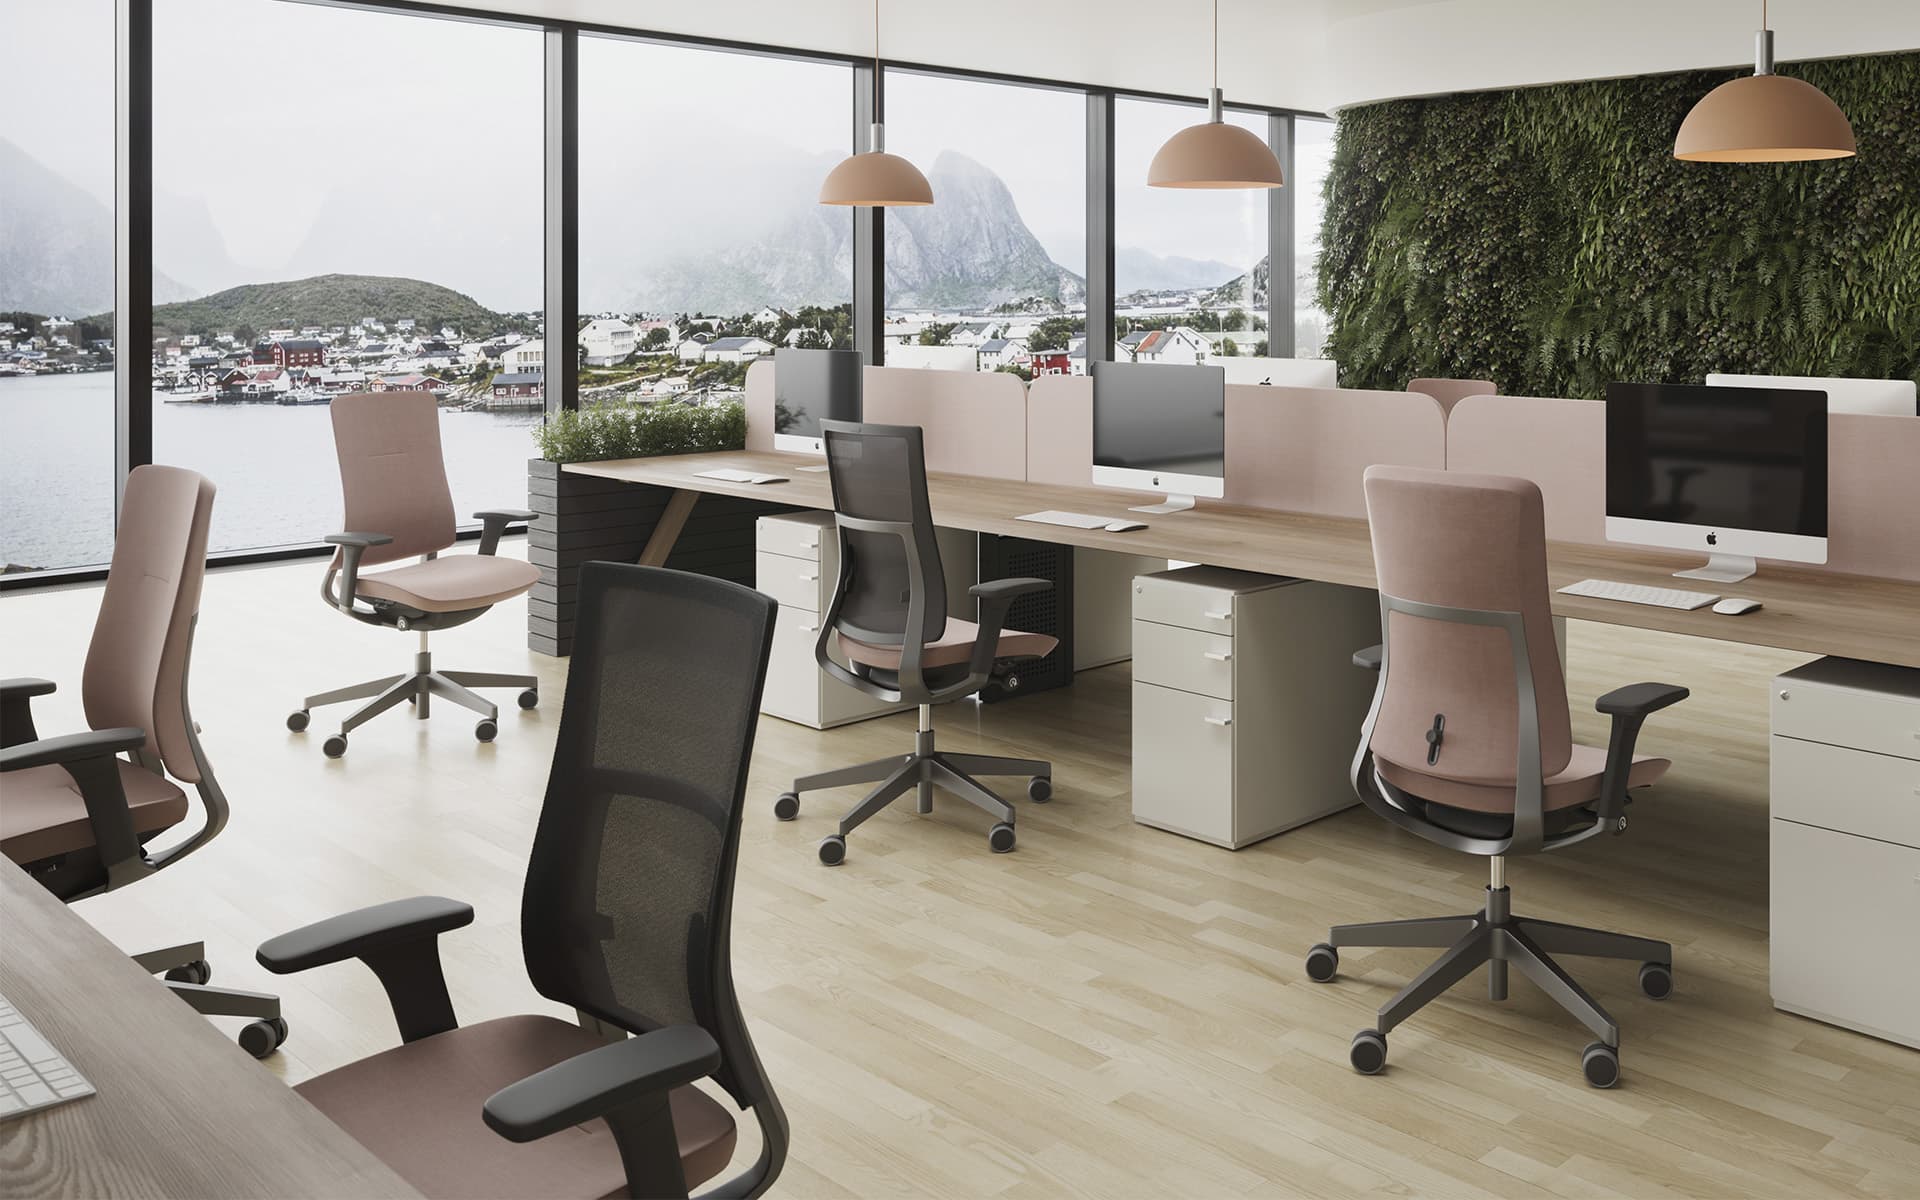 Several Profim Violle office chairs in dusky pink in stylish open space office with large window facade and view of a fjord